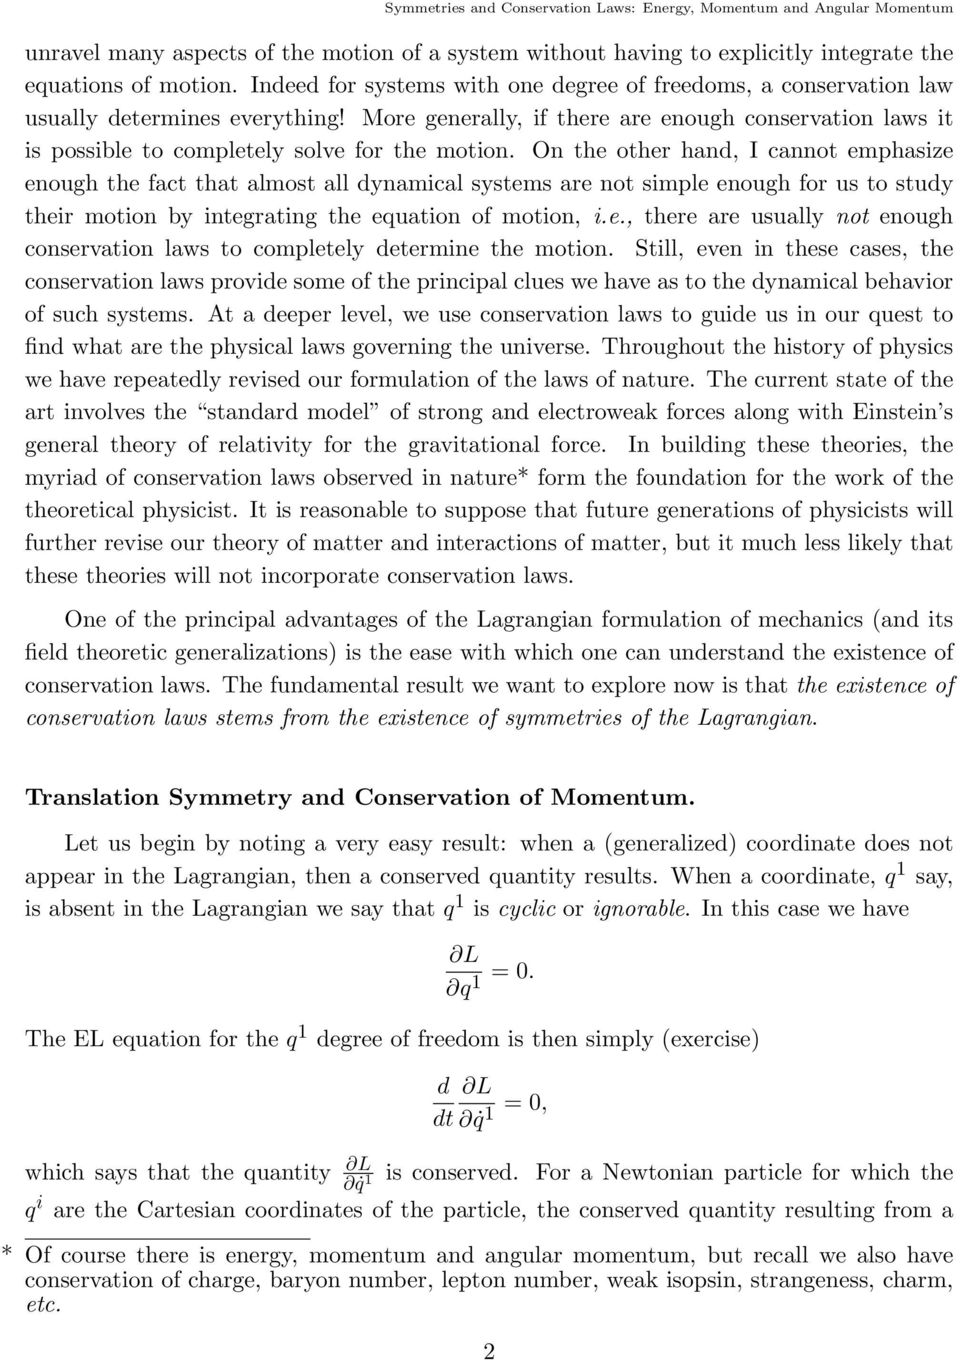 On the other hnd, I cnnot emphsize enough the fct tht lmost ll dynmicl systems re not simple enough for us to study their motion by integrting the eqution of motion, i.e., there re usully not enough conservtion lws to completely determine the motion.